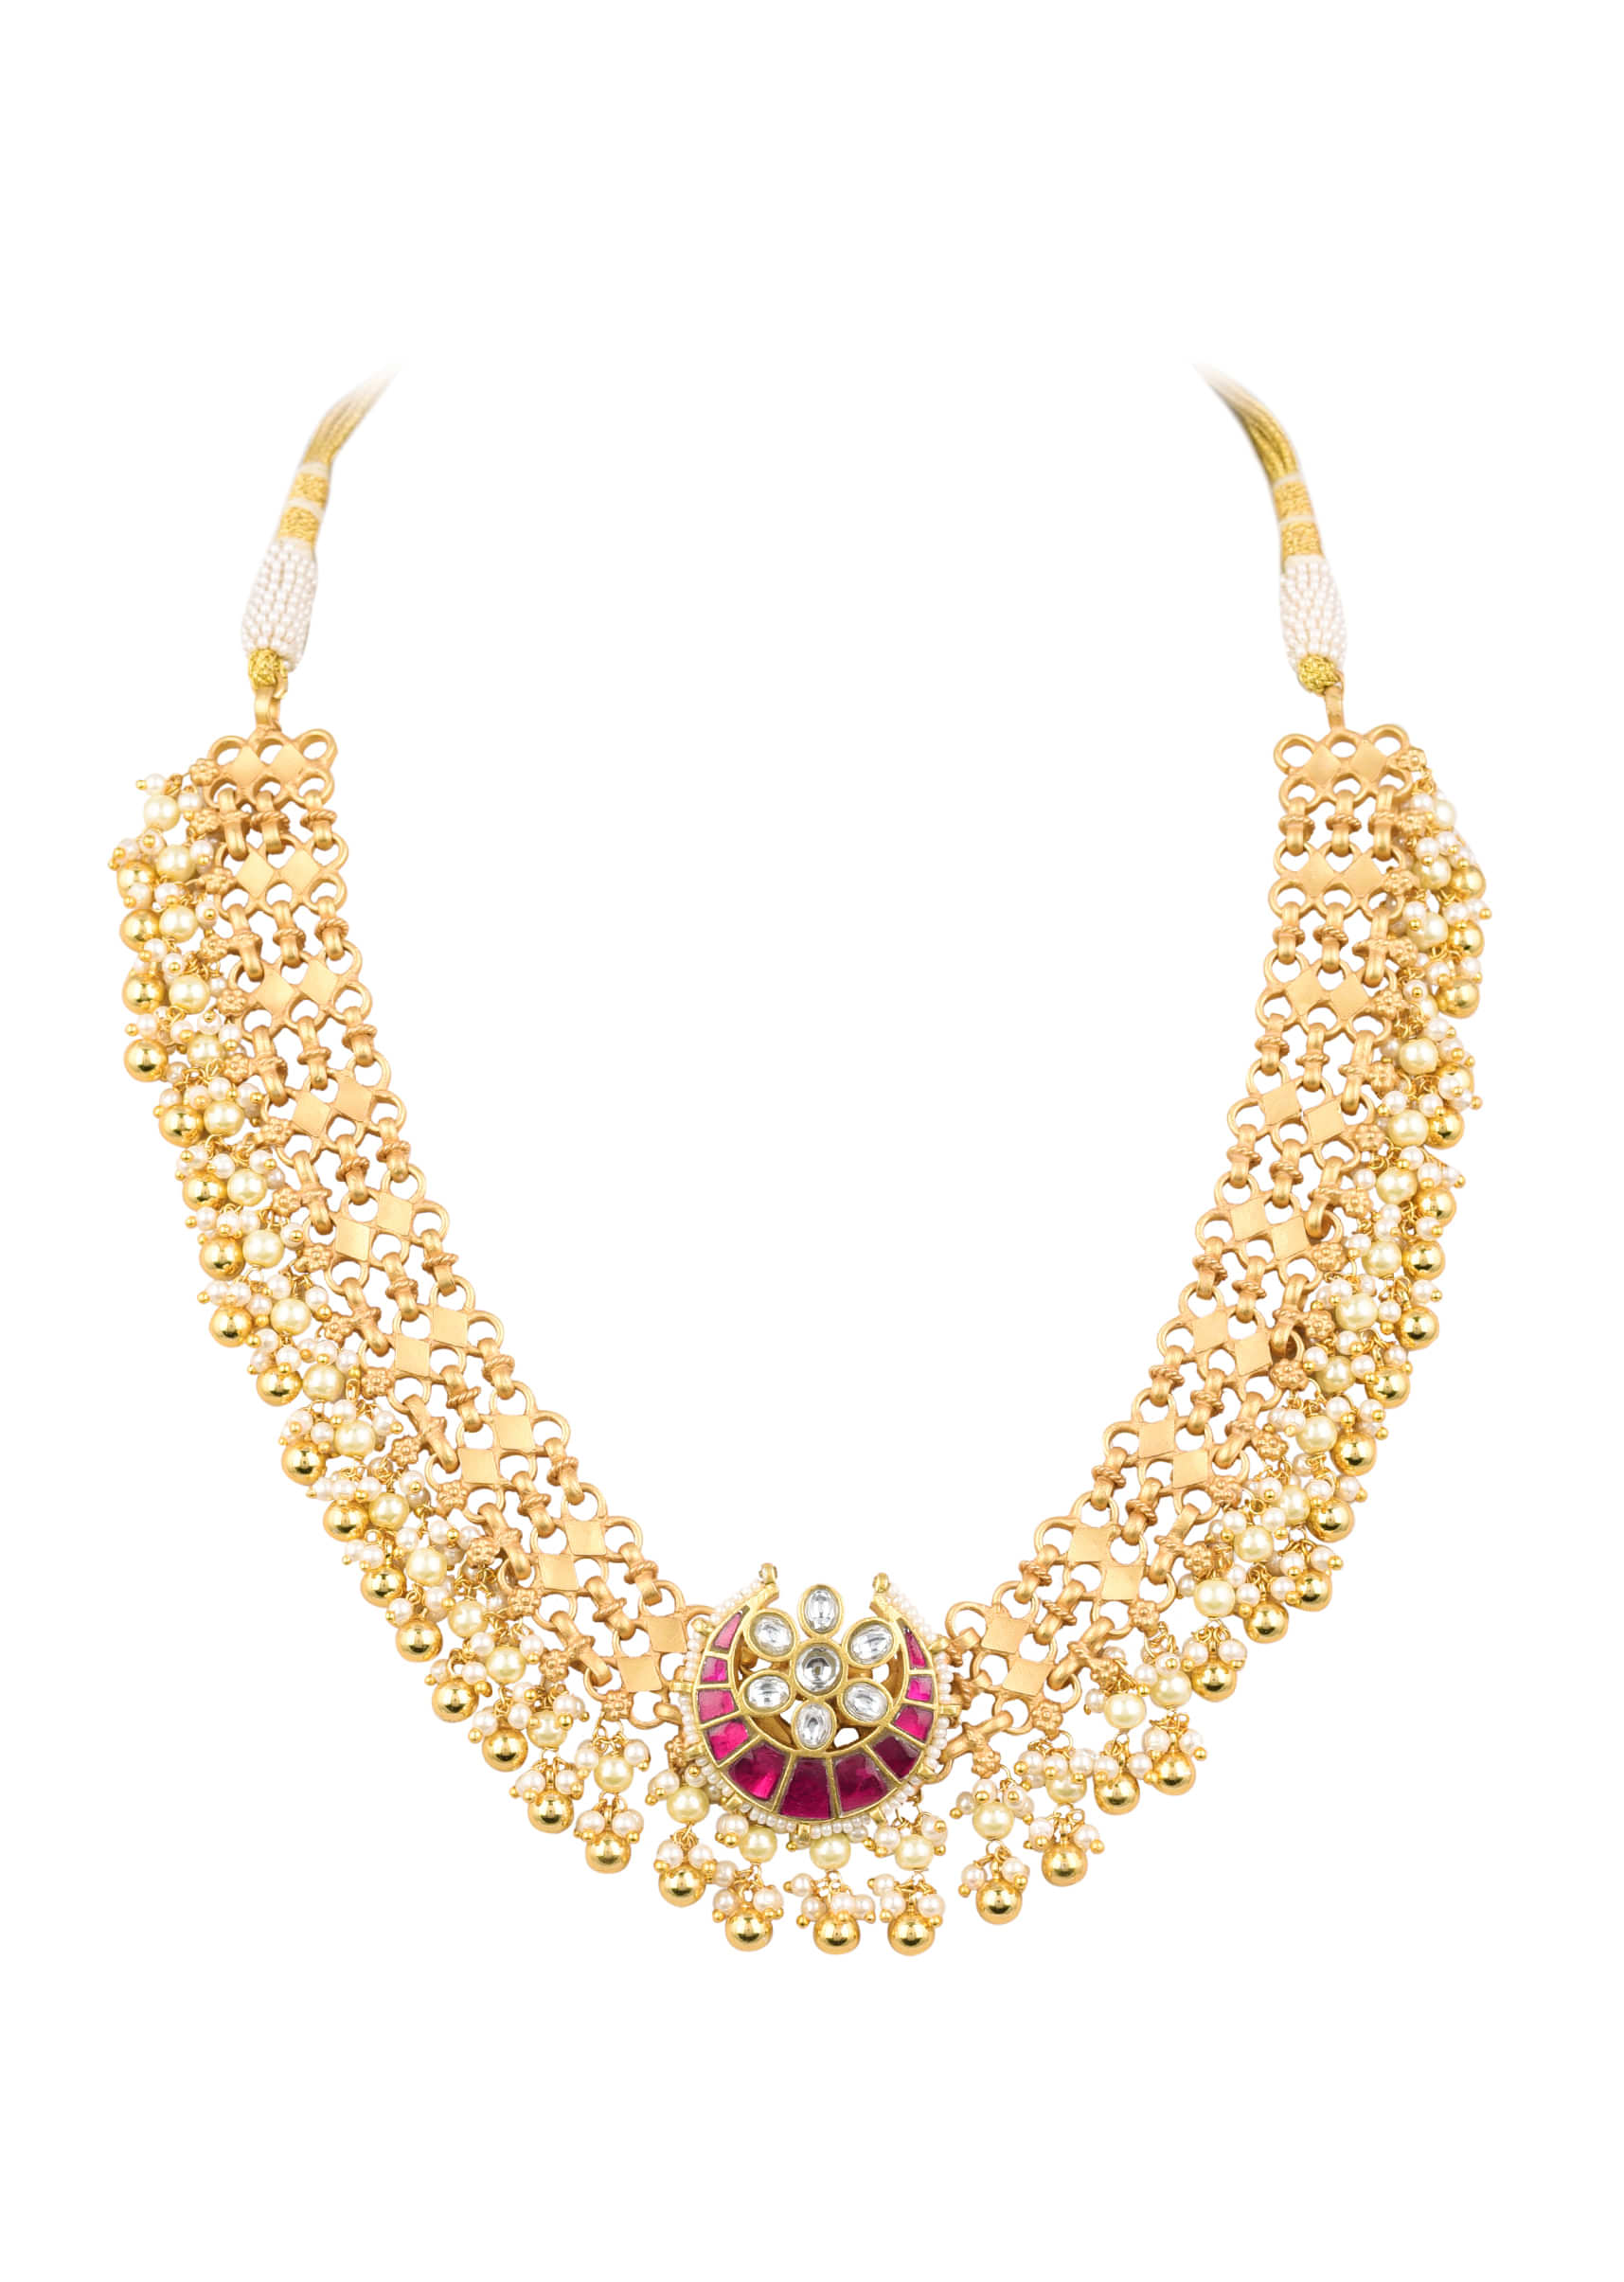 Gold Finish Kundan Necklace Set With Beads And Synthetic Ruby Stones